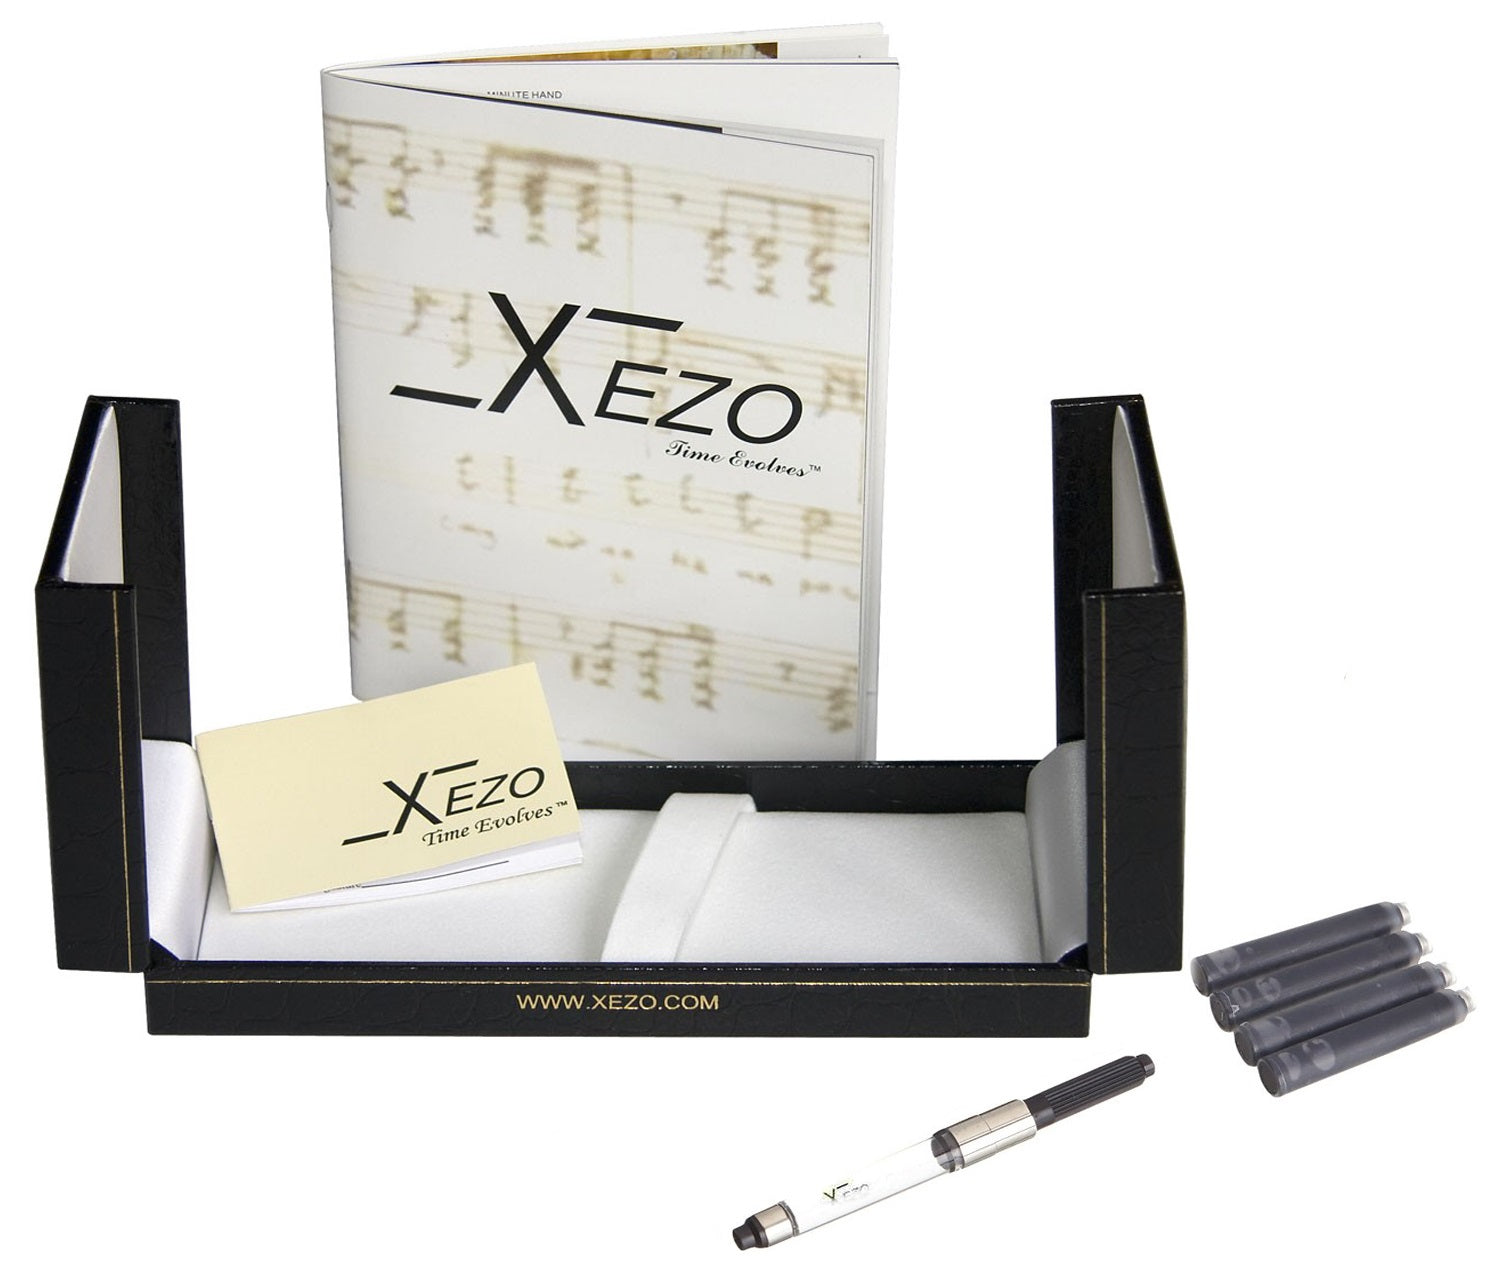 Xezo - Black gift box, certificate, manual, chrome-plated ink converter, and four ink cartridges of the Visionary Sky Blue/White FM fountain pen